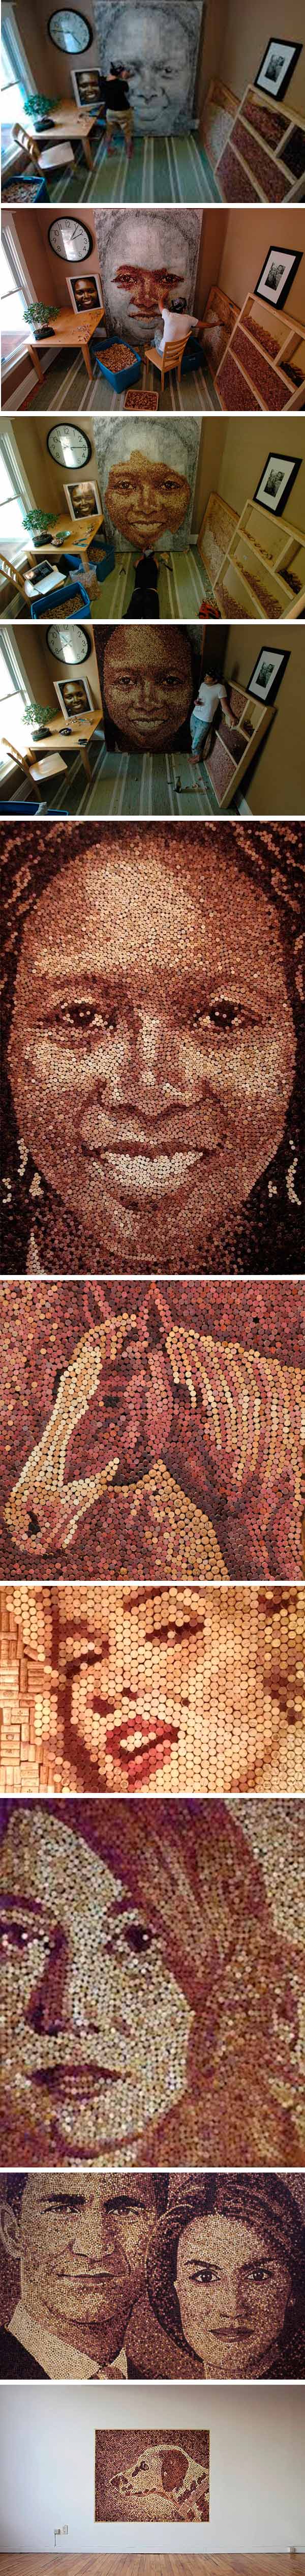 recycle corks - portraits